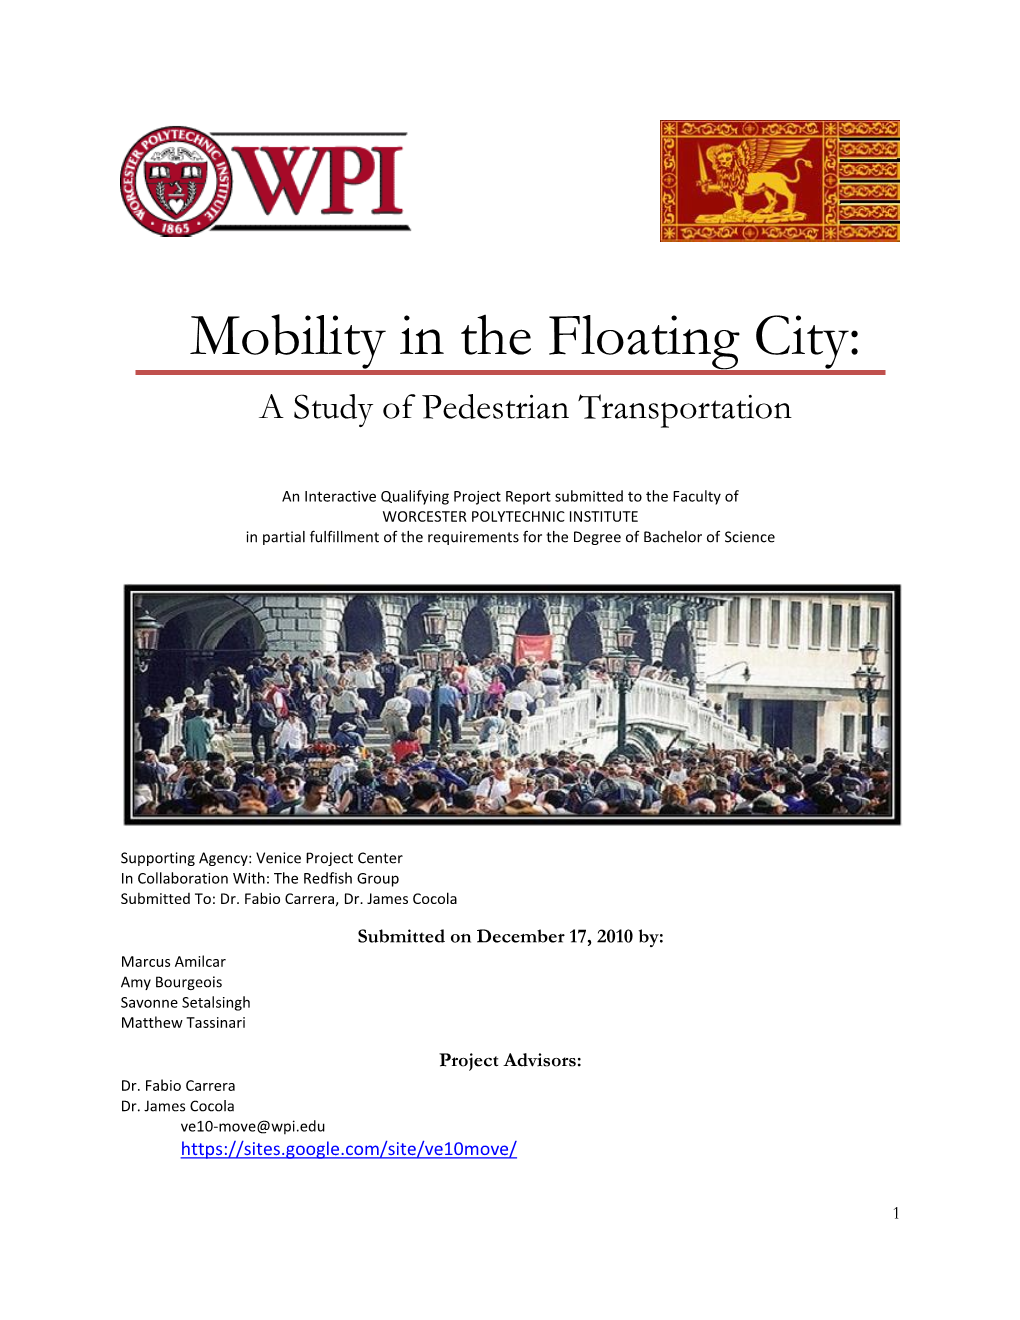 Mobility in the Floating City: a Study of Pedestrian Transportation